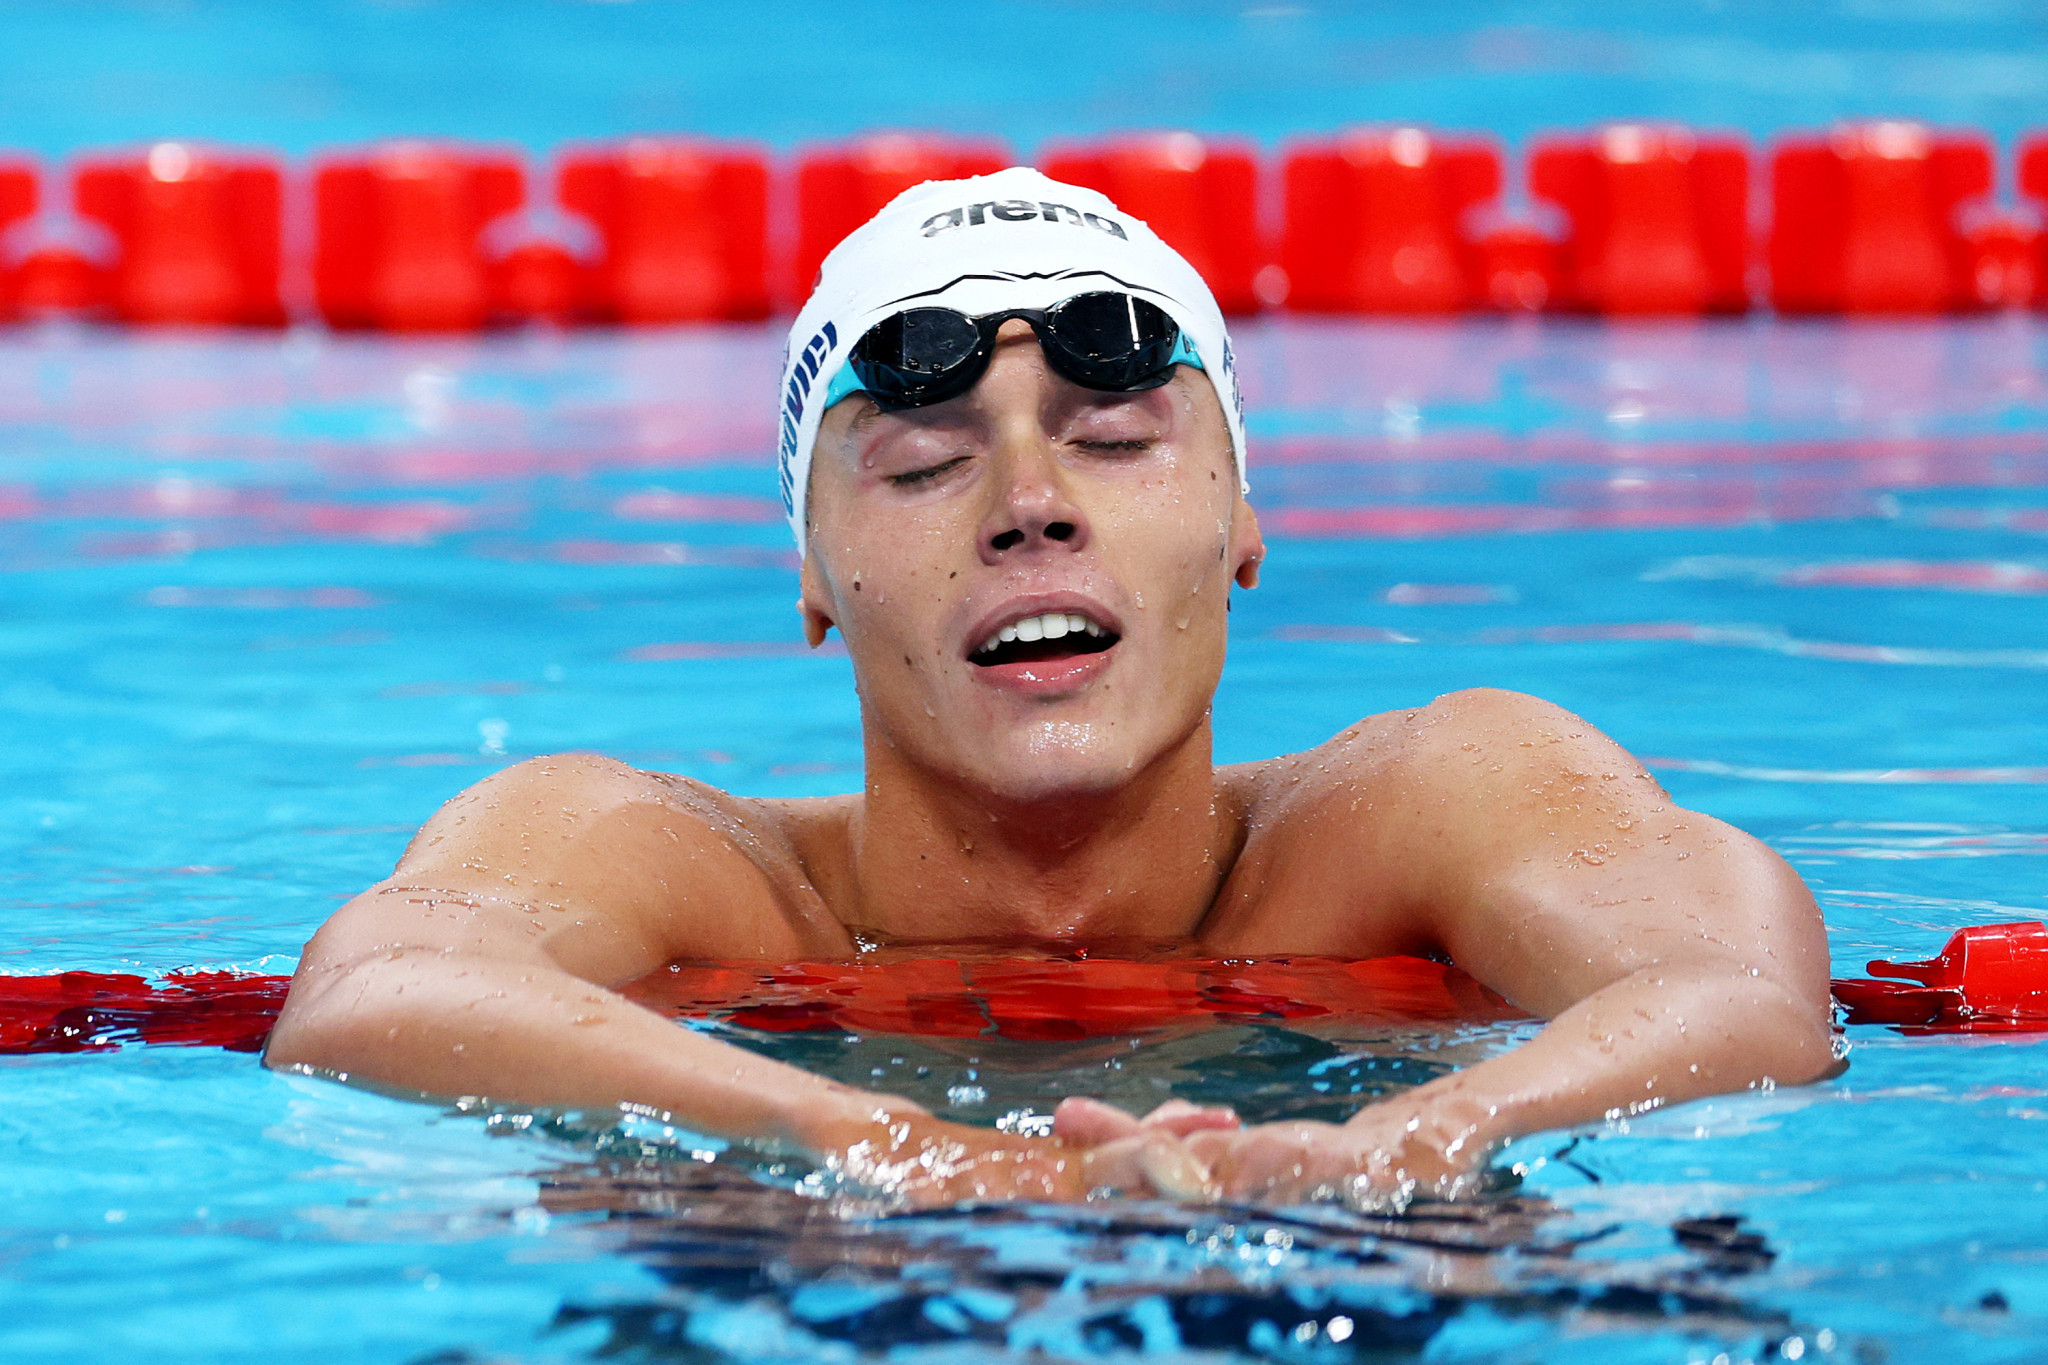 David Popovici secured gold in the 200m freestyle. GETTY IMAGES